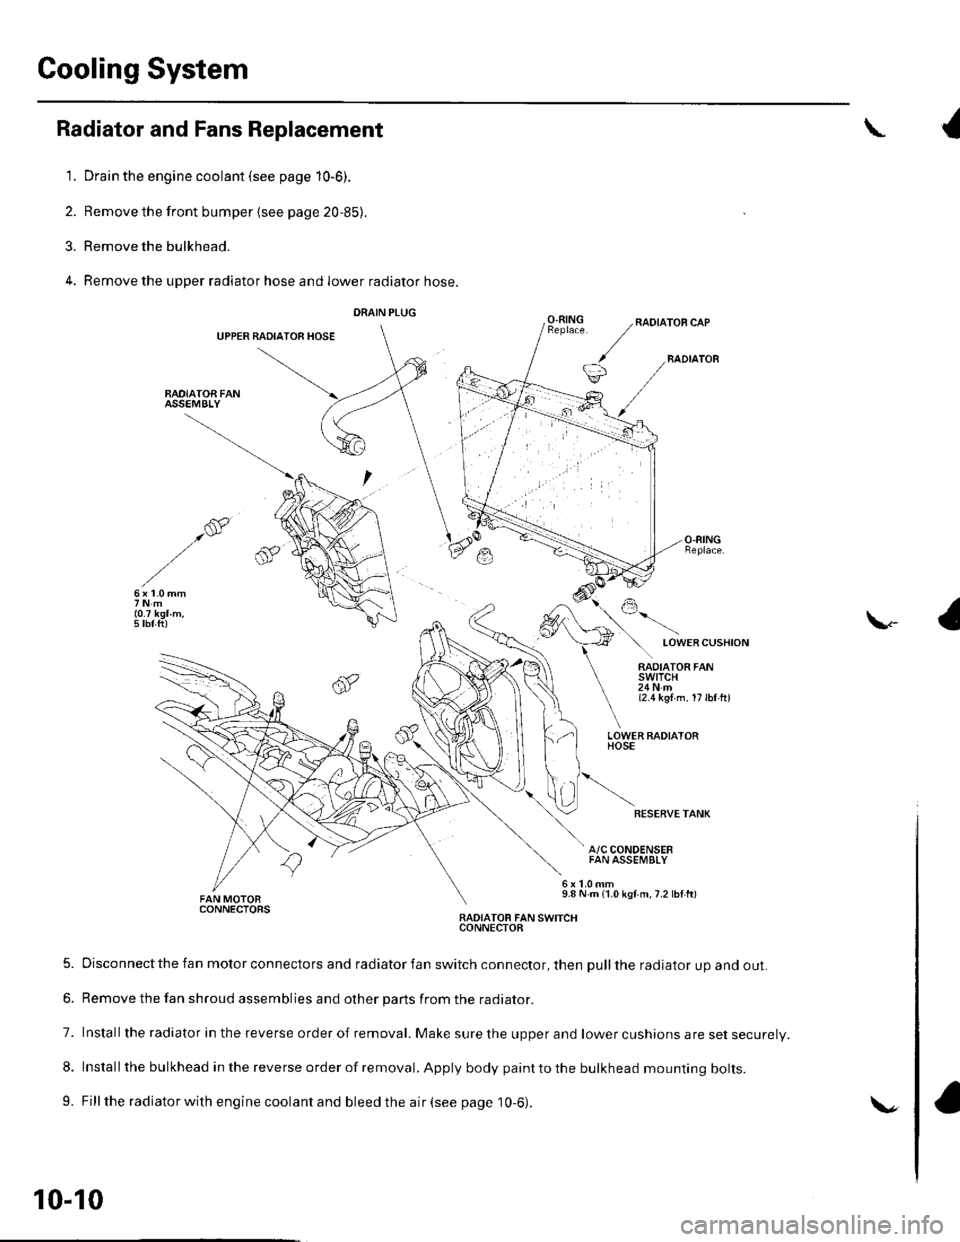 HONDA CIVIC 2002 7.G Workshop Manual Cooling System
Radiator and Fans Replacement
1. Drain the engine coolant (see page 10-6).
2. Remove the front bumper {see page 20,85).
3. Remove the bulkhead.
4. Remove the upper radiator hose and low